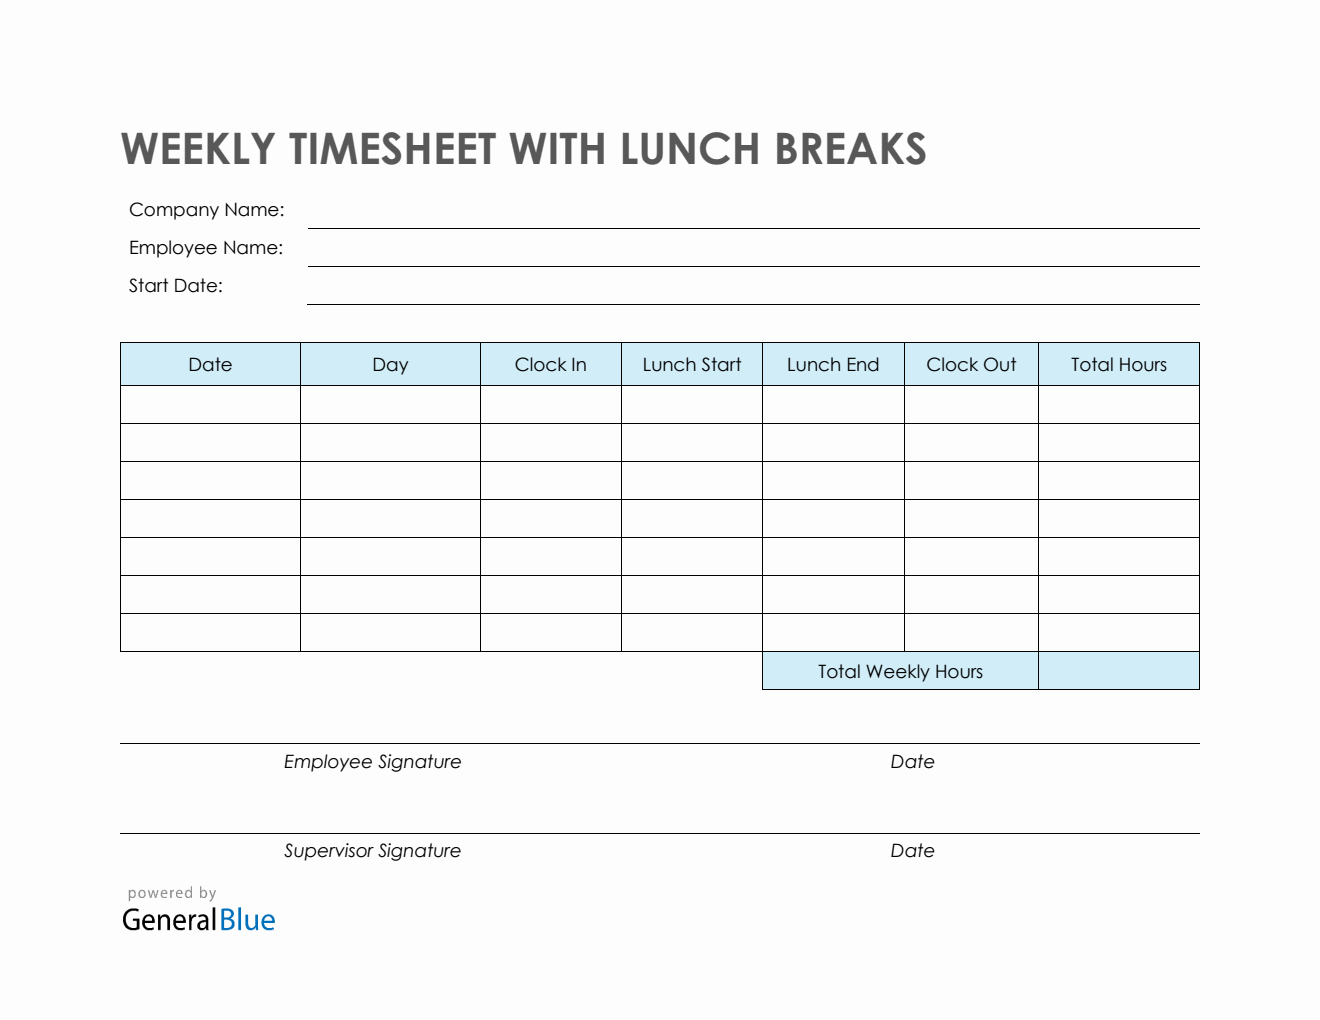 Weekly Timesheet With Lunch Breaks in PDF